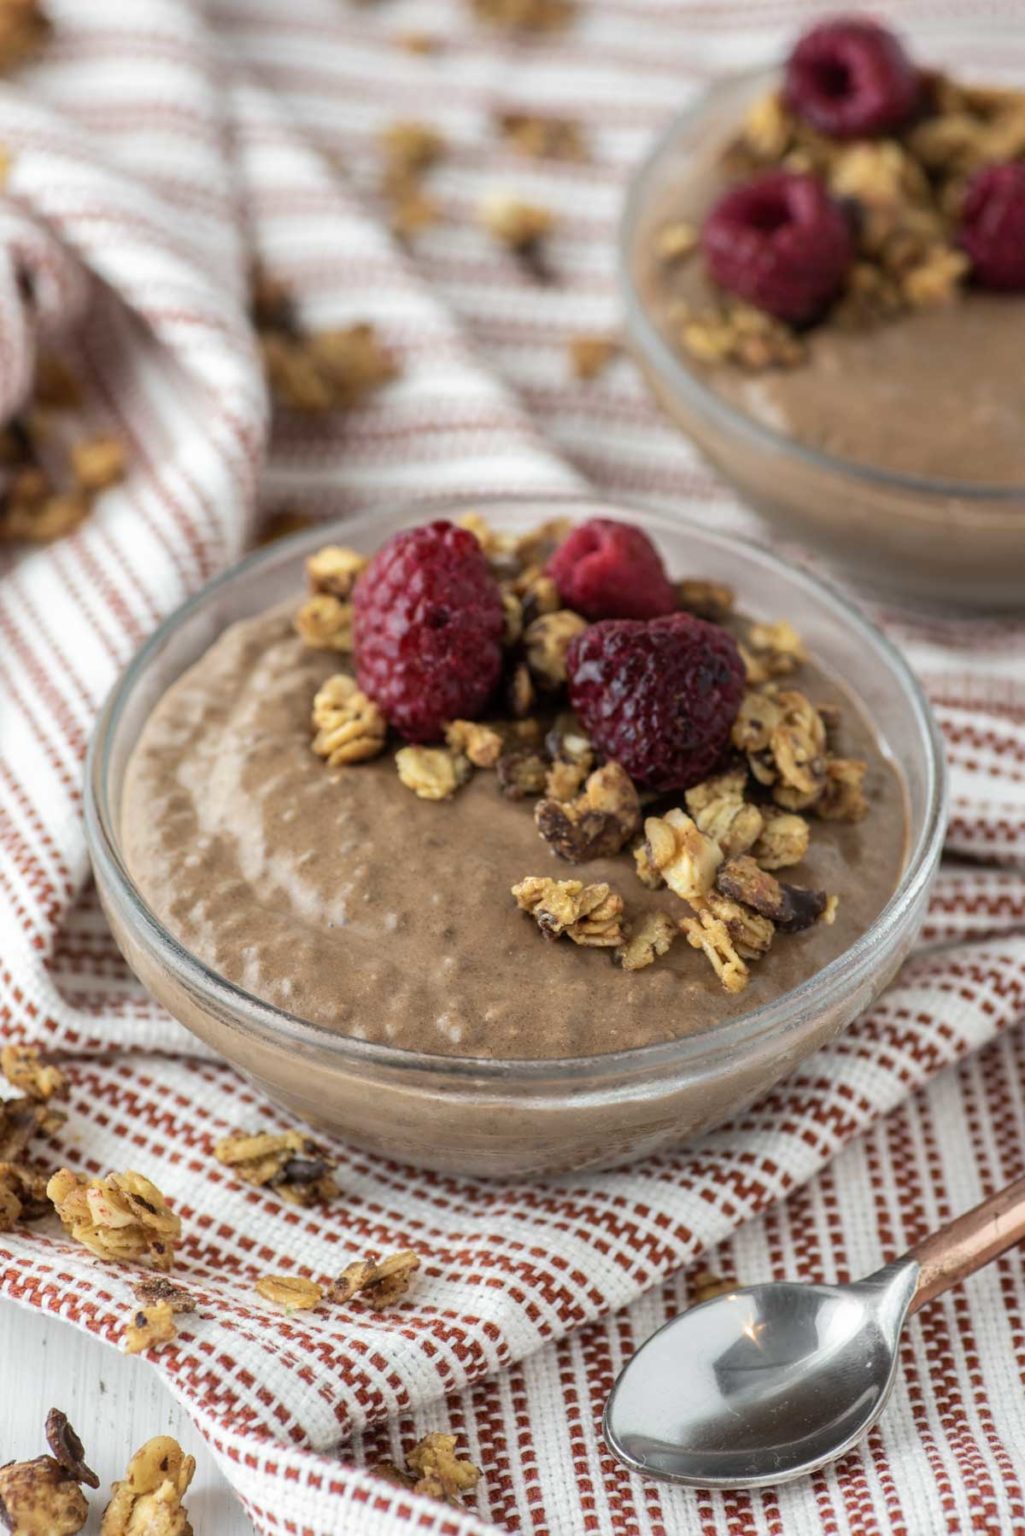 Chocolate Chia Seed Pudding Recipe - Chisel & Fork